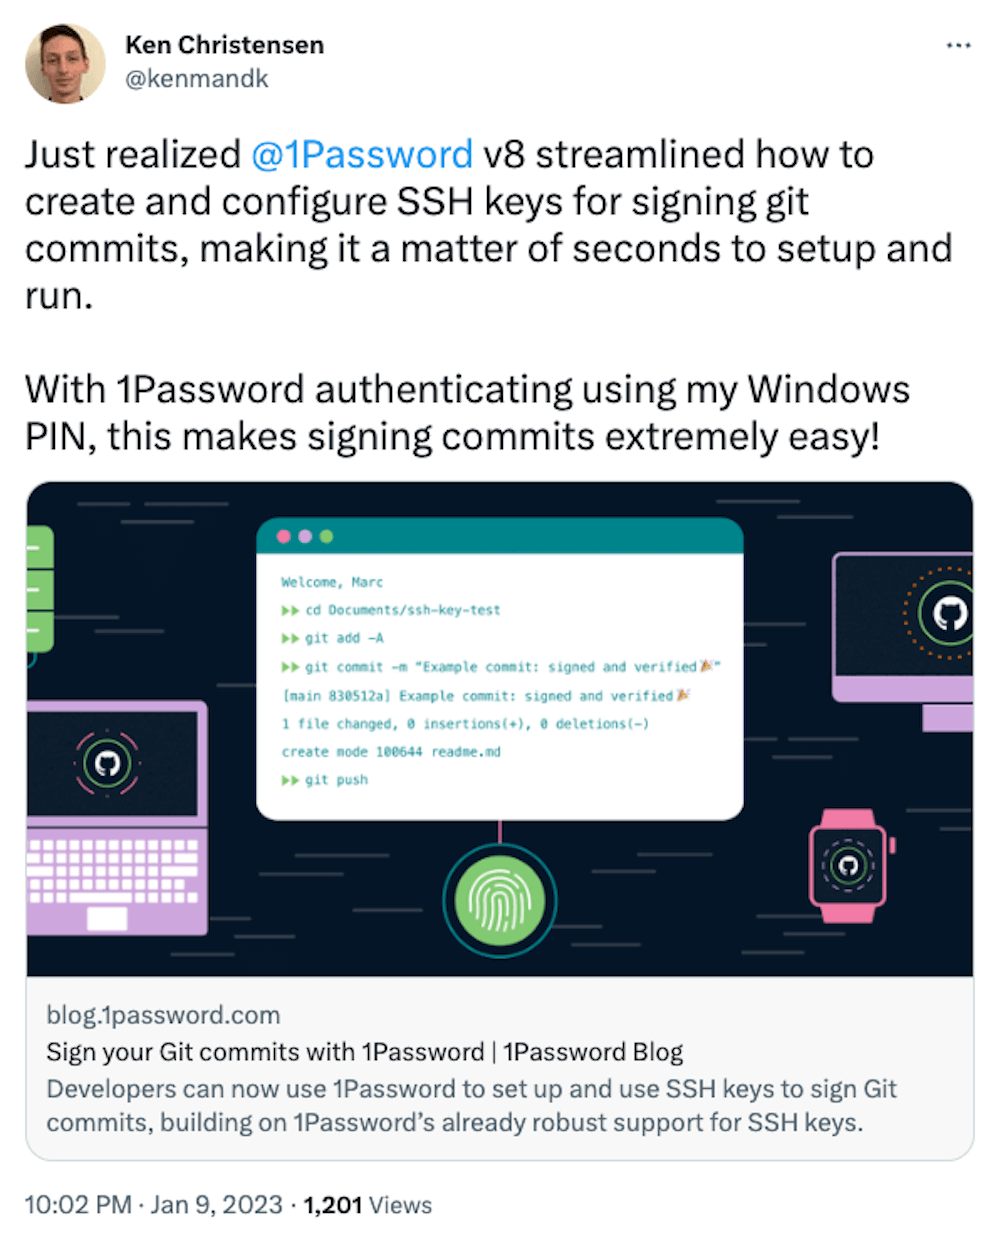 A tweet from Twitter user 'Kenmand' that reads: Just realized 1Password v8 streamlined how to create and configure SSH keys for signing git commits, making it a matter of seconds to set up and run.